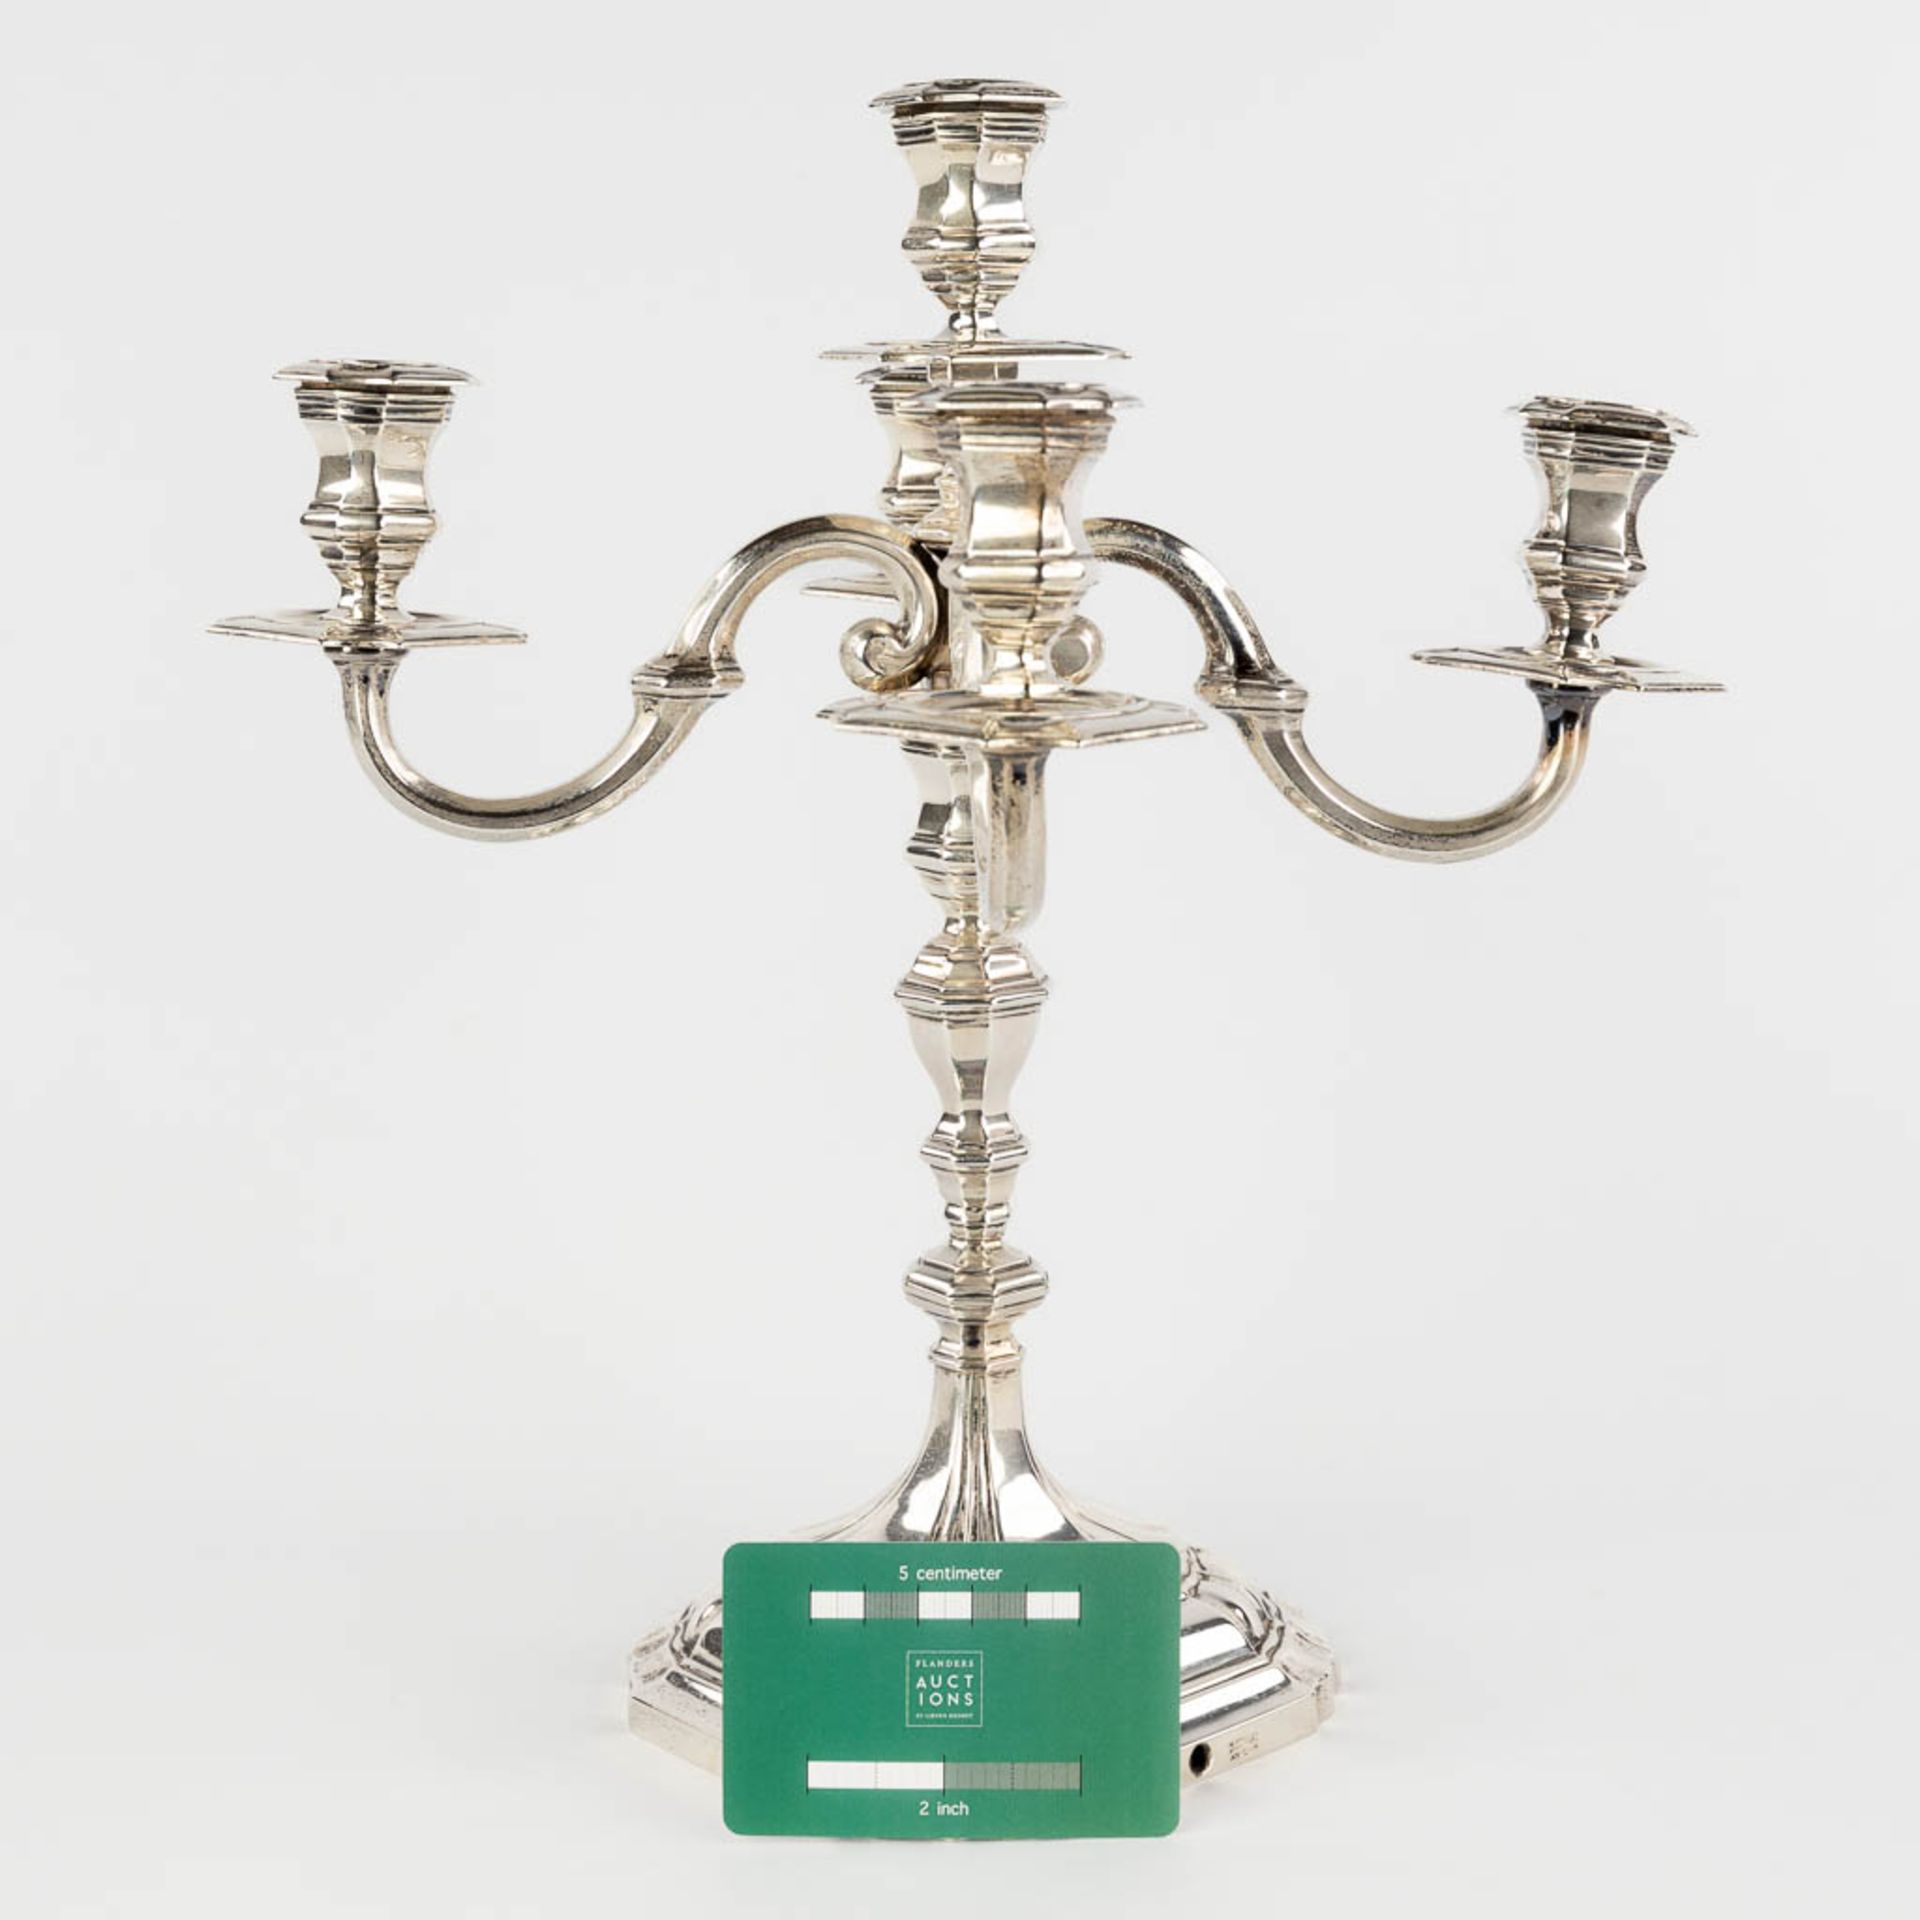 A silver 5 candle candelabra, 950M. Signed Lens Anvers. Belgium, 20th C. (L:23,5 x W:23,5 x H:33 cm) - Image 2 of 10